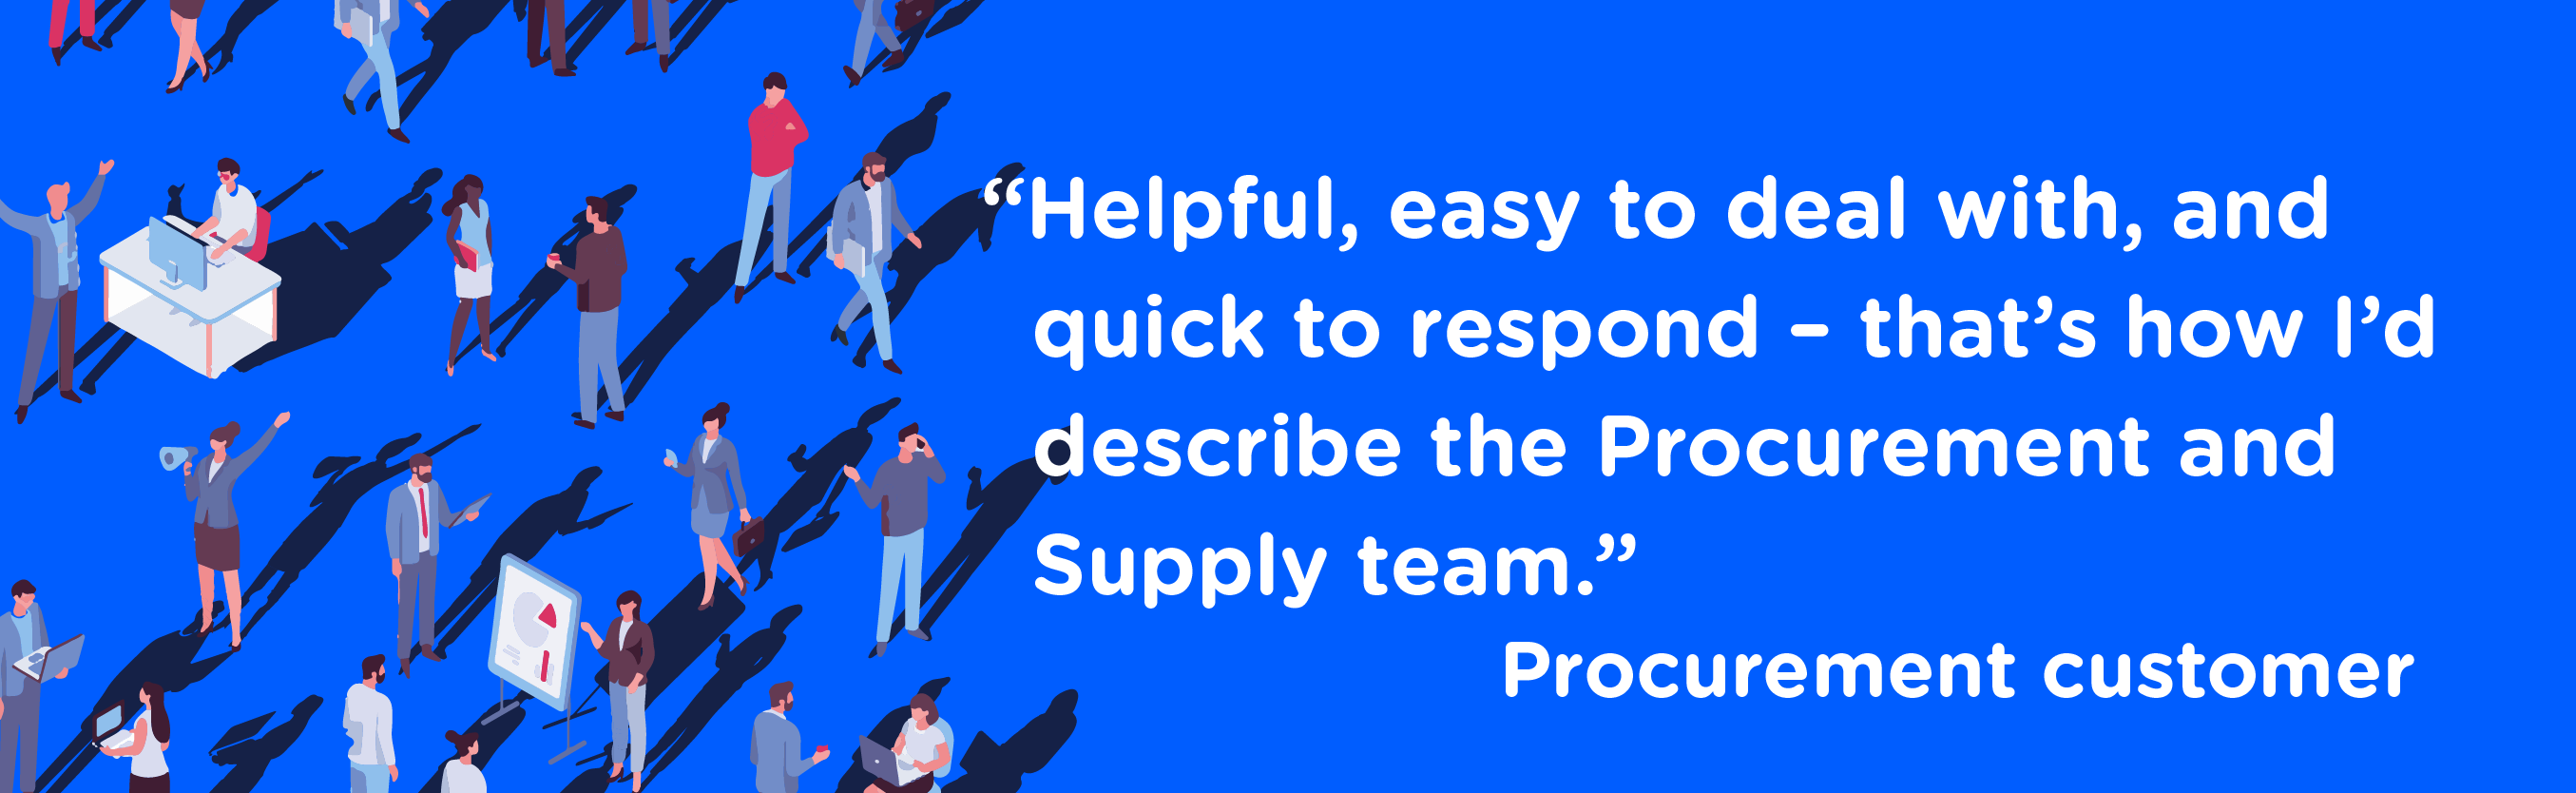 Procurement customer quote reading "Helpful, easy to deal with, and quick to respond - that's how I'd describe the Procurement and Supply team"